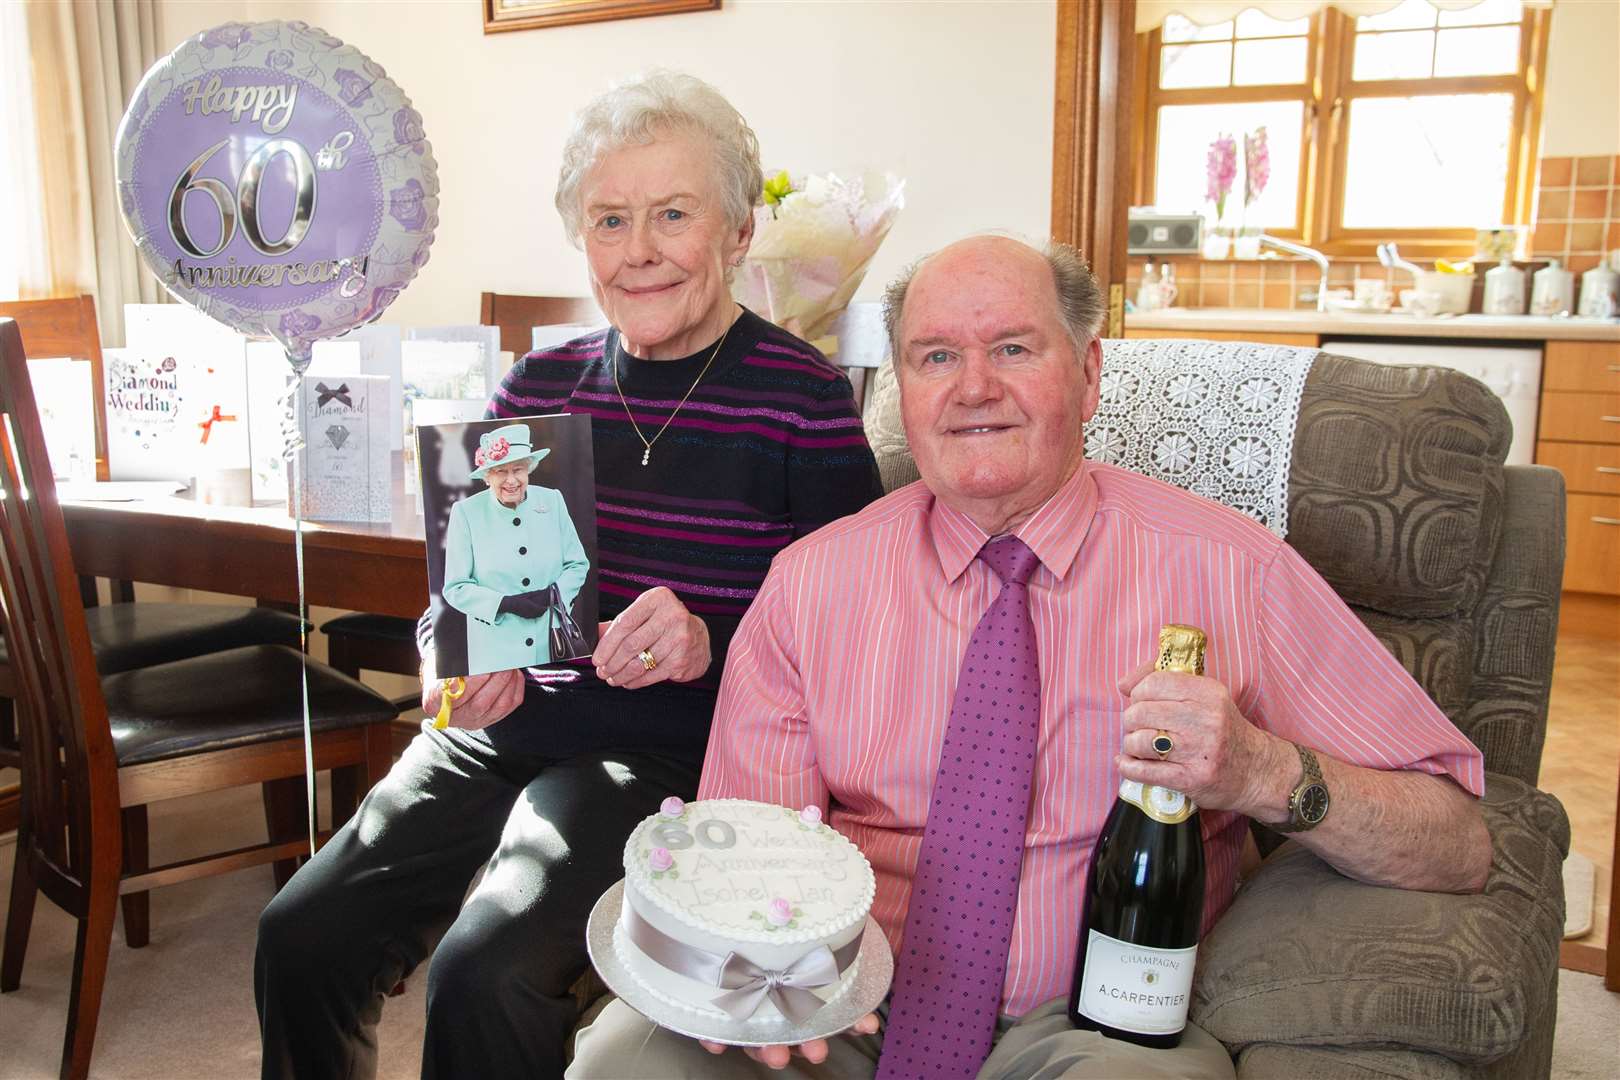 Ian and Isobel Christie, orginally from Brora, celebrate 60 years of married life at the house in Forres. ..Picture: Daniel Forsyth..